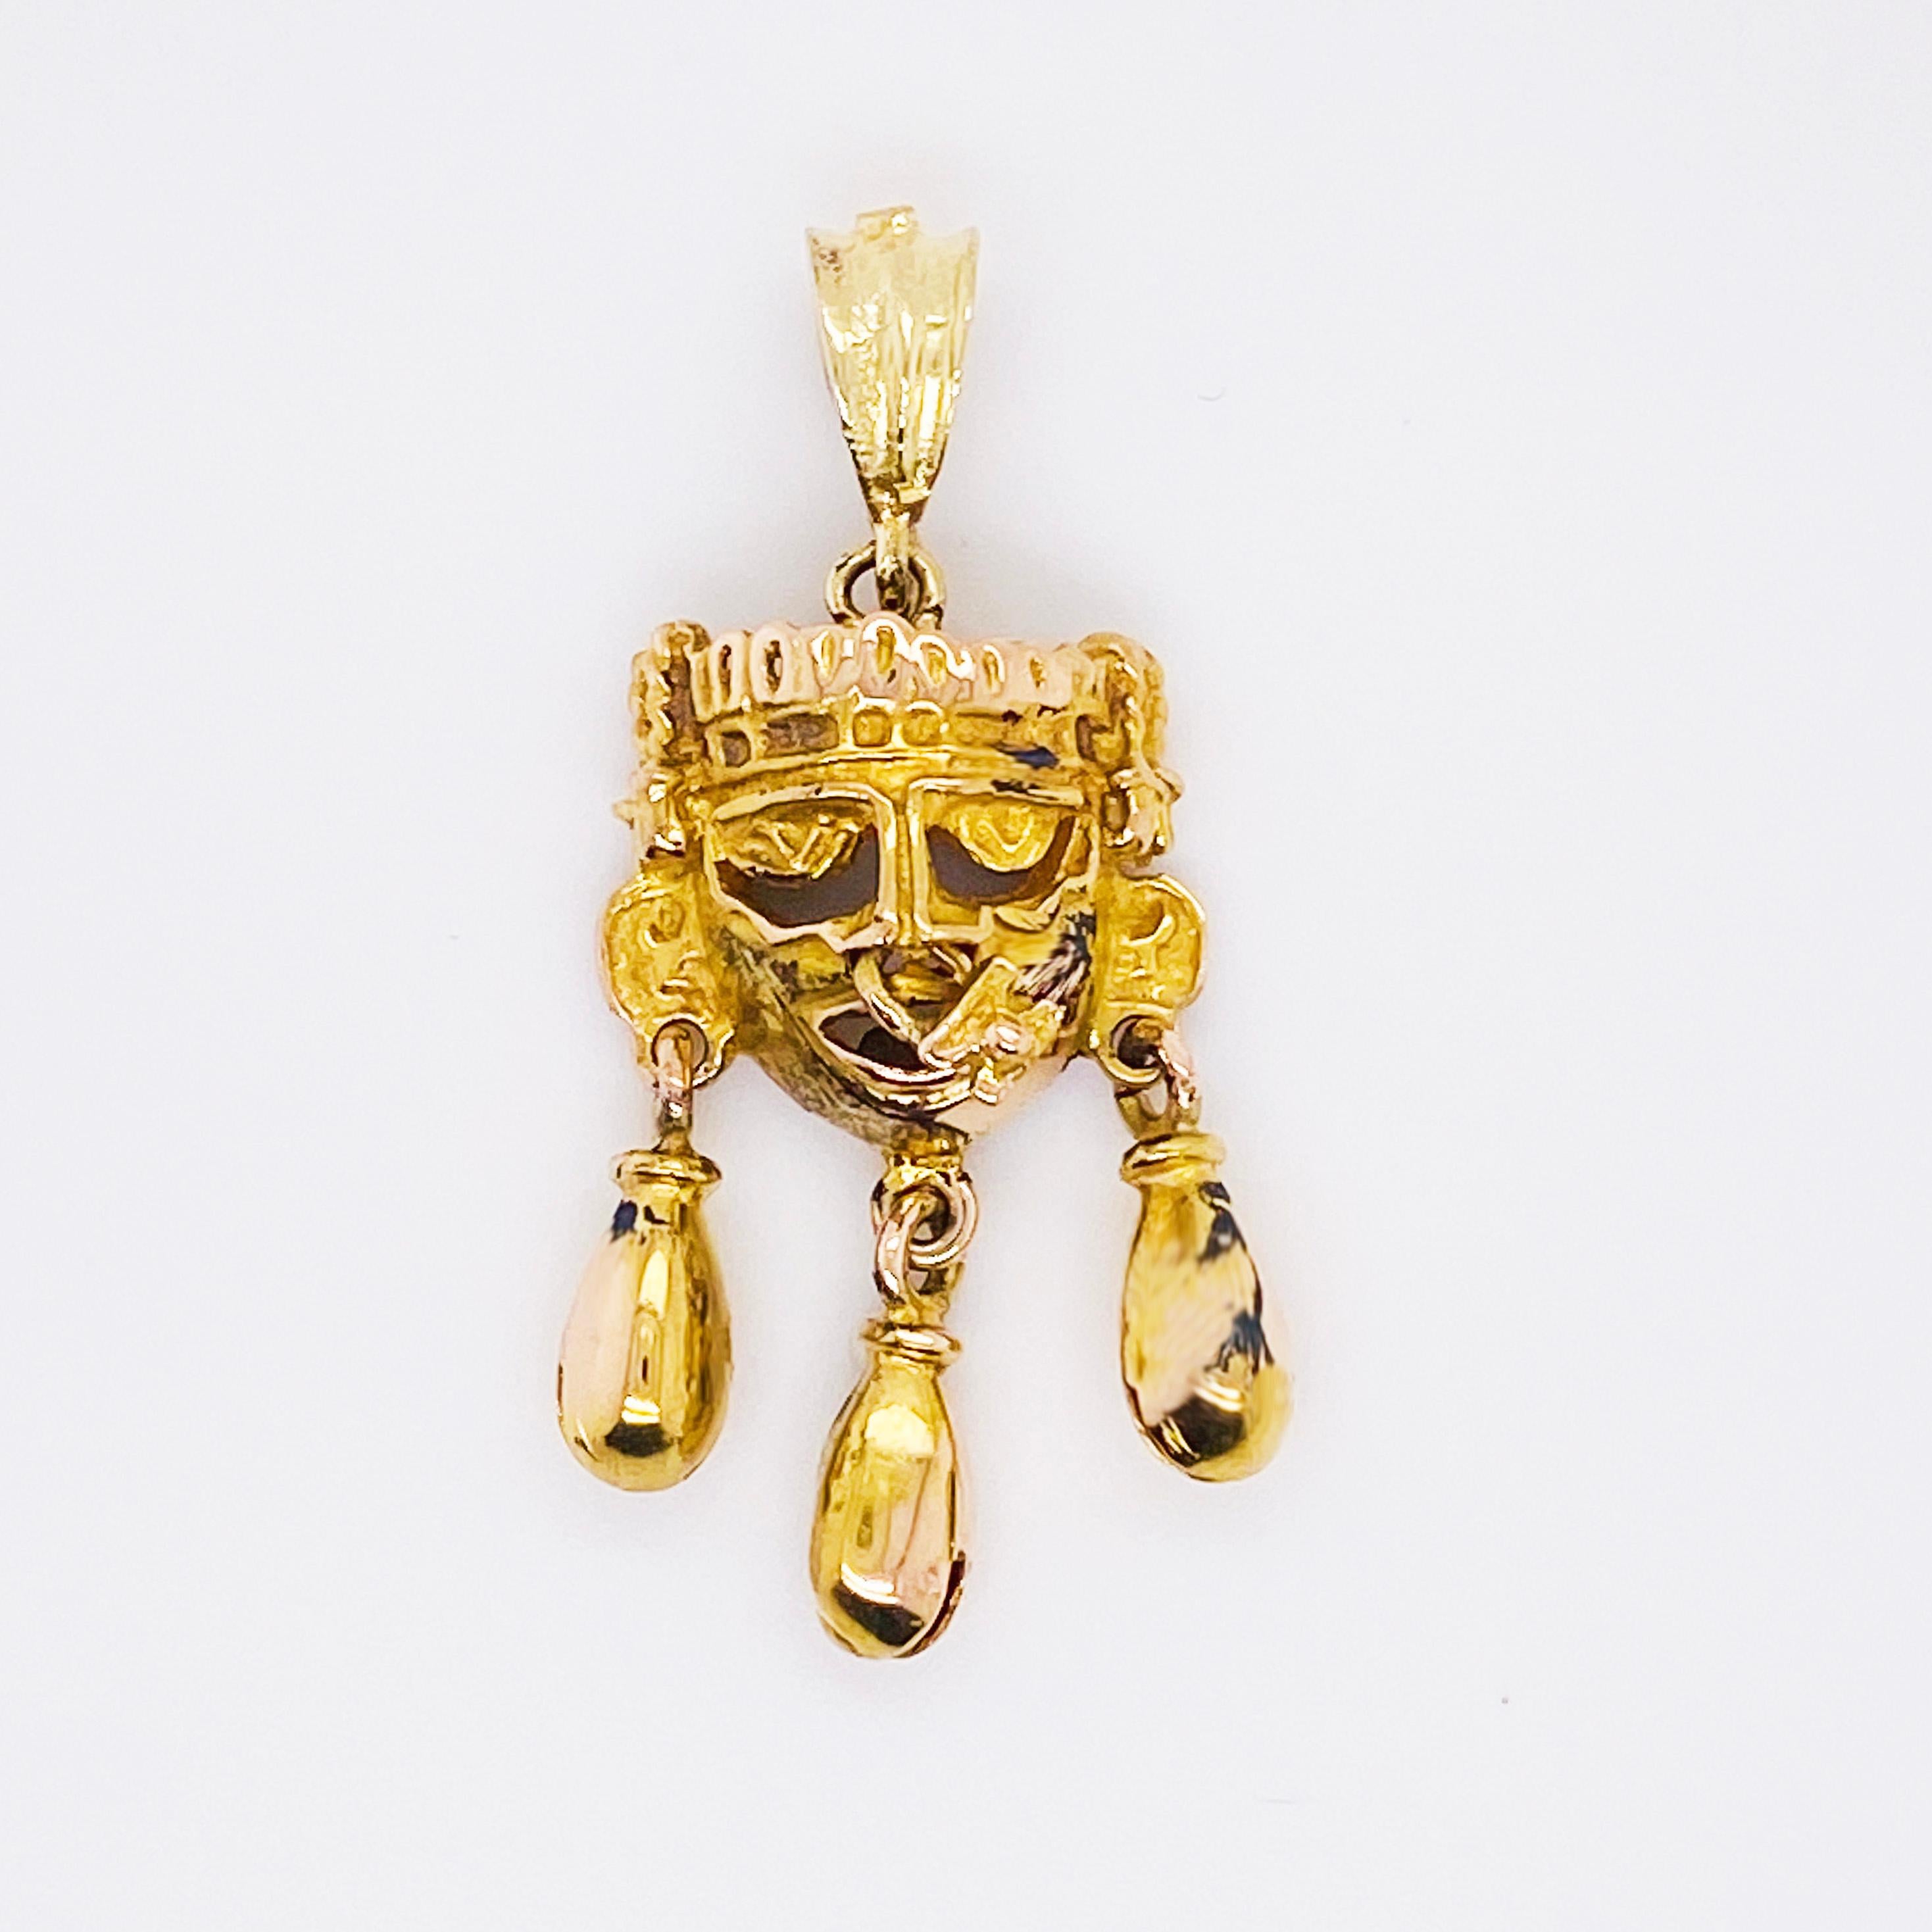 The Monte Alban gold masks were artifacts found in the Oaxaca tomb. The Monte Alban is an ancient site active during the pre-Aztec periods and a very important and historic discovery in Mexico. The gold mask is the mask of 